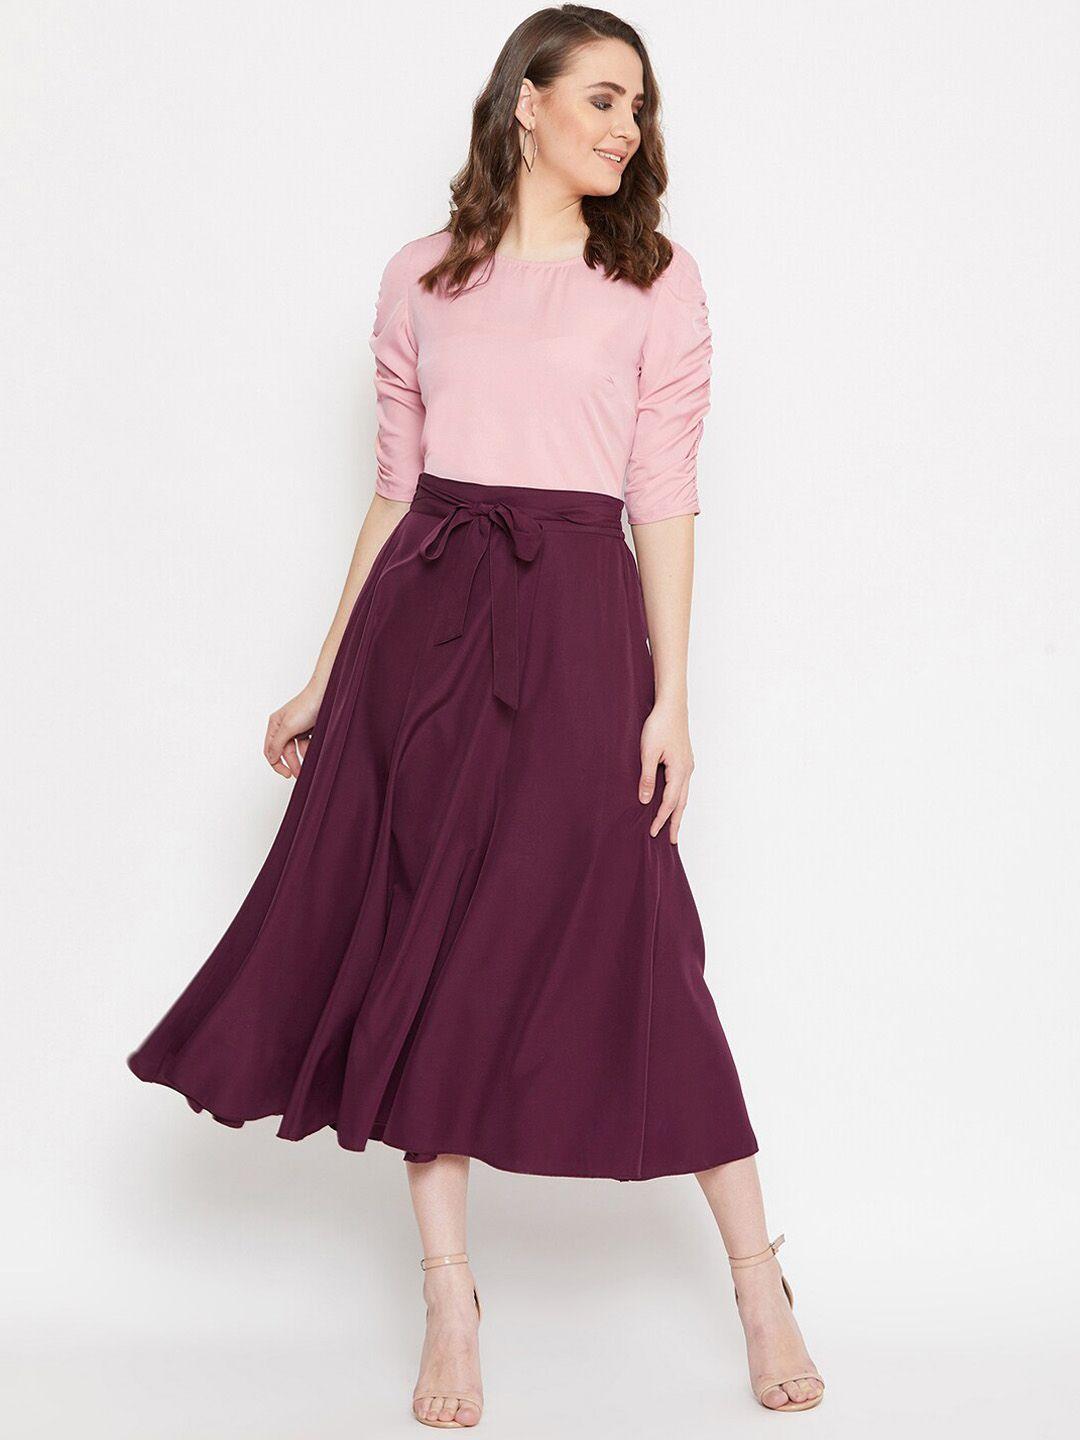 bitterlime women pink & burgundy solid top with skirt